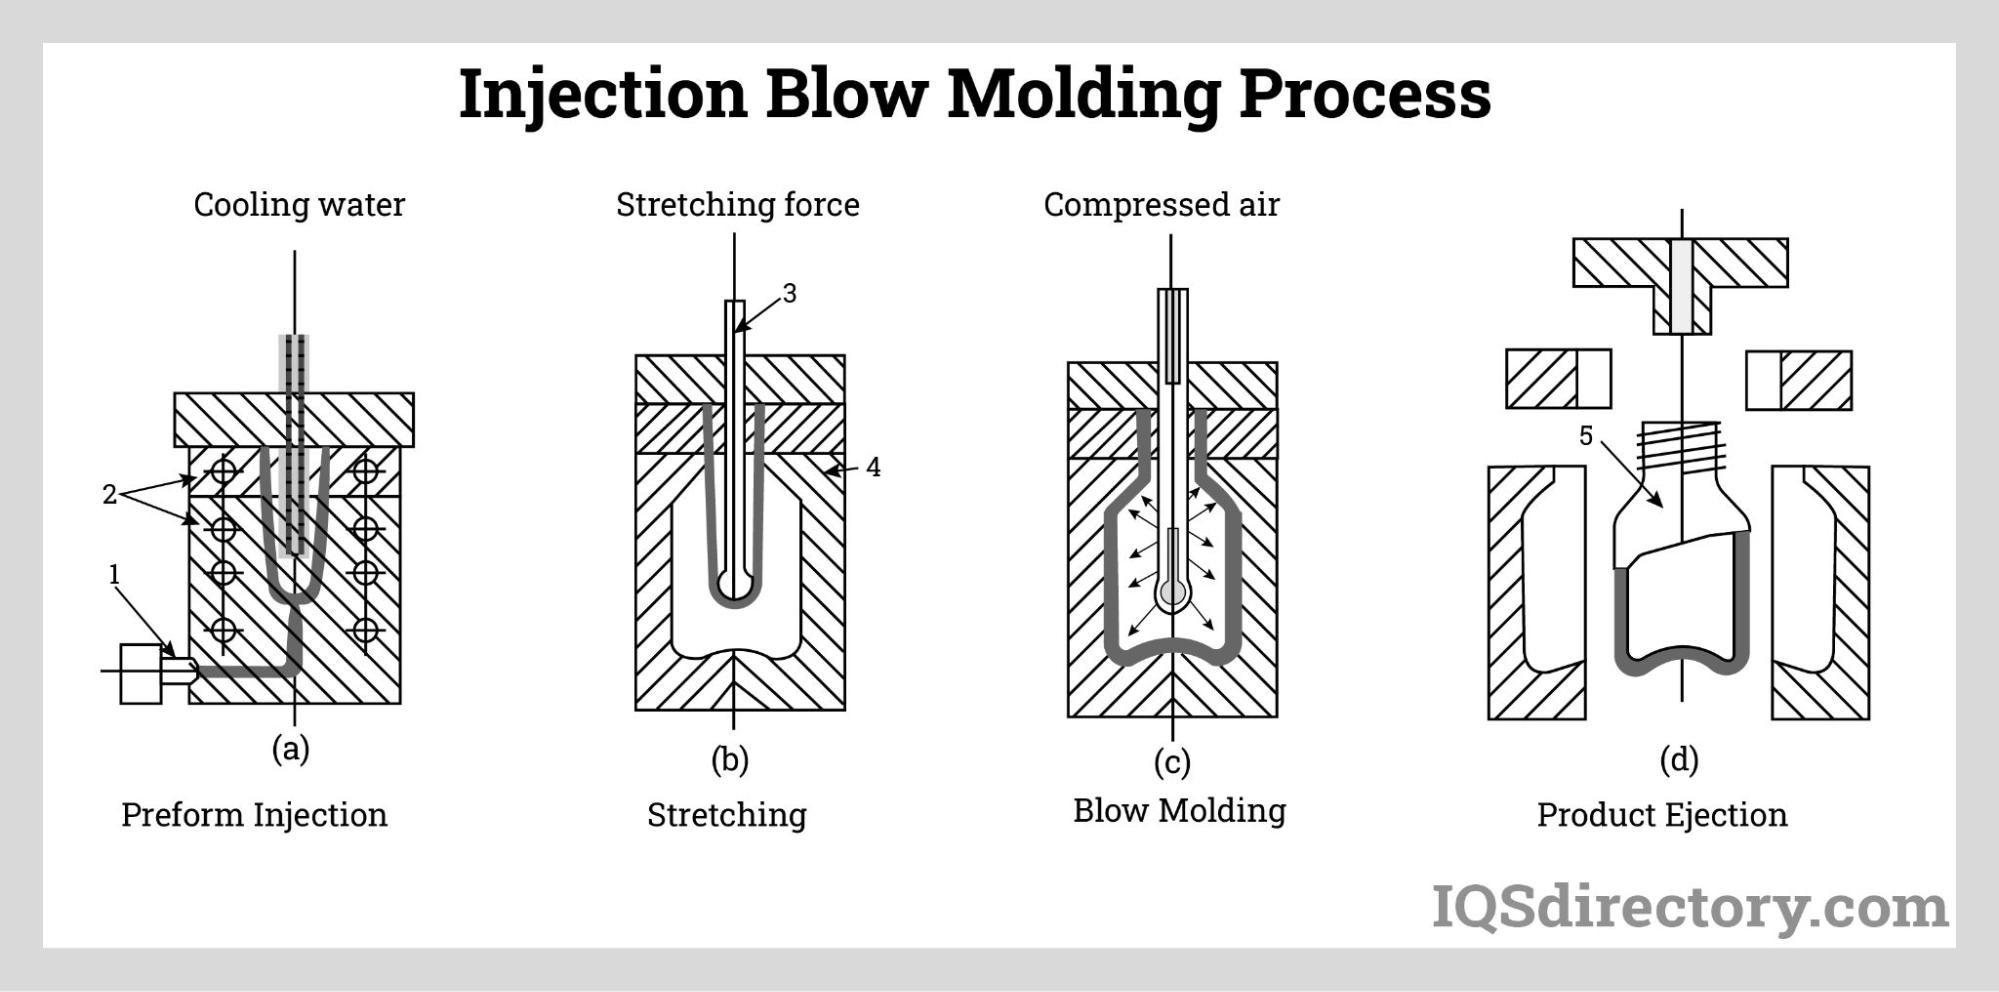 Injection Blow Molding Process